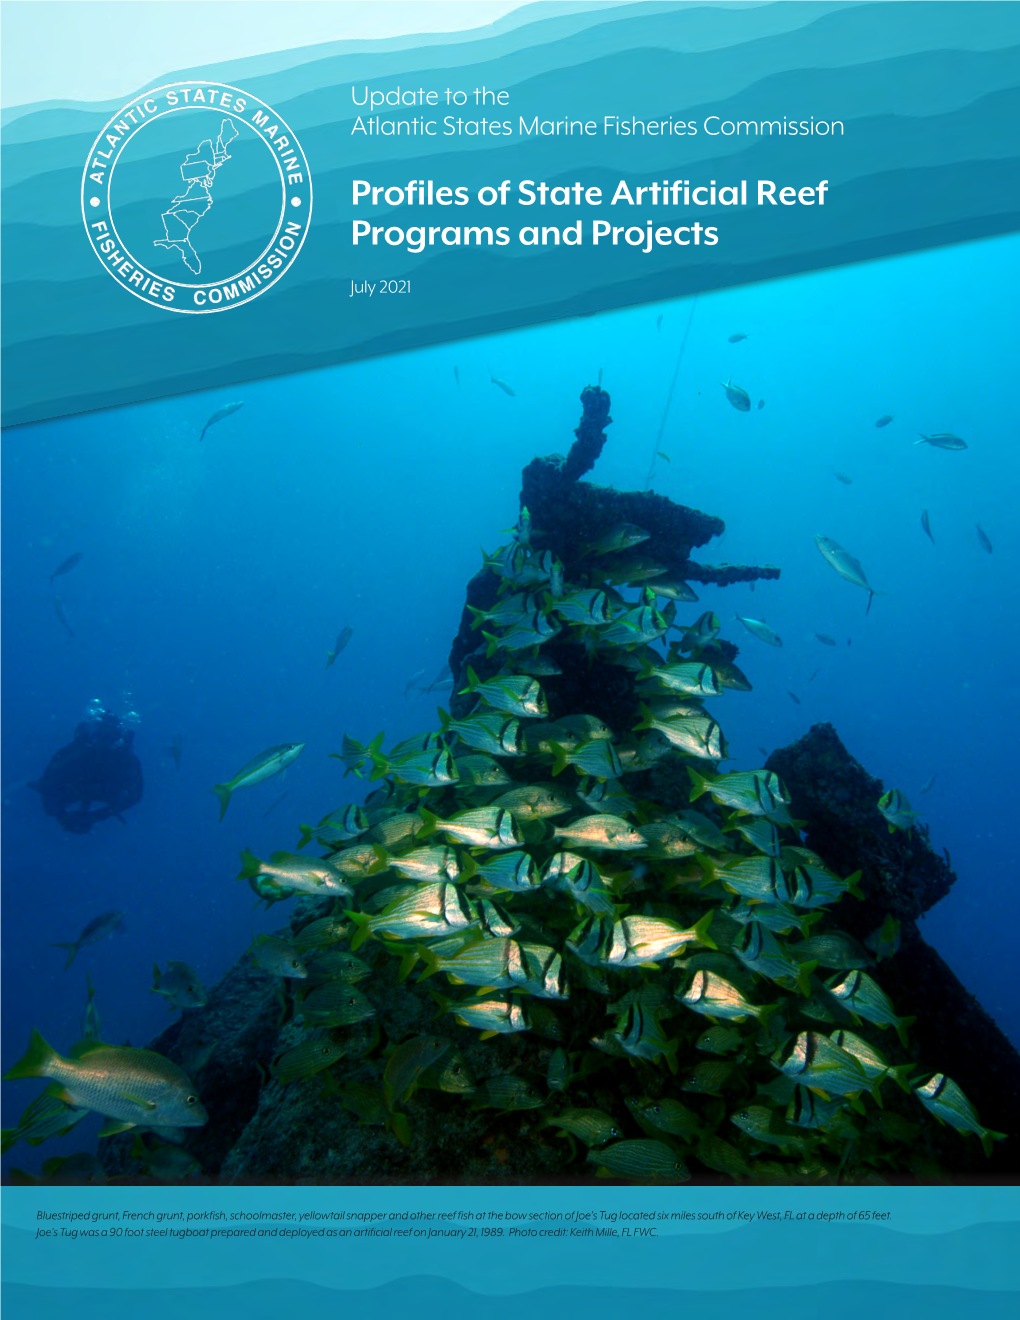 Update to the ASMFC Profiles of State Artificial Reef Programs and Projects